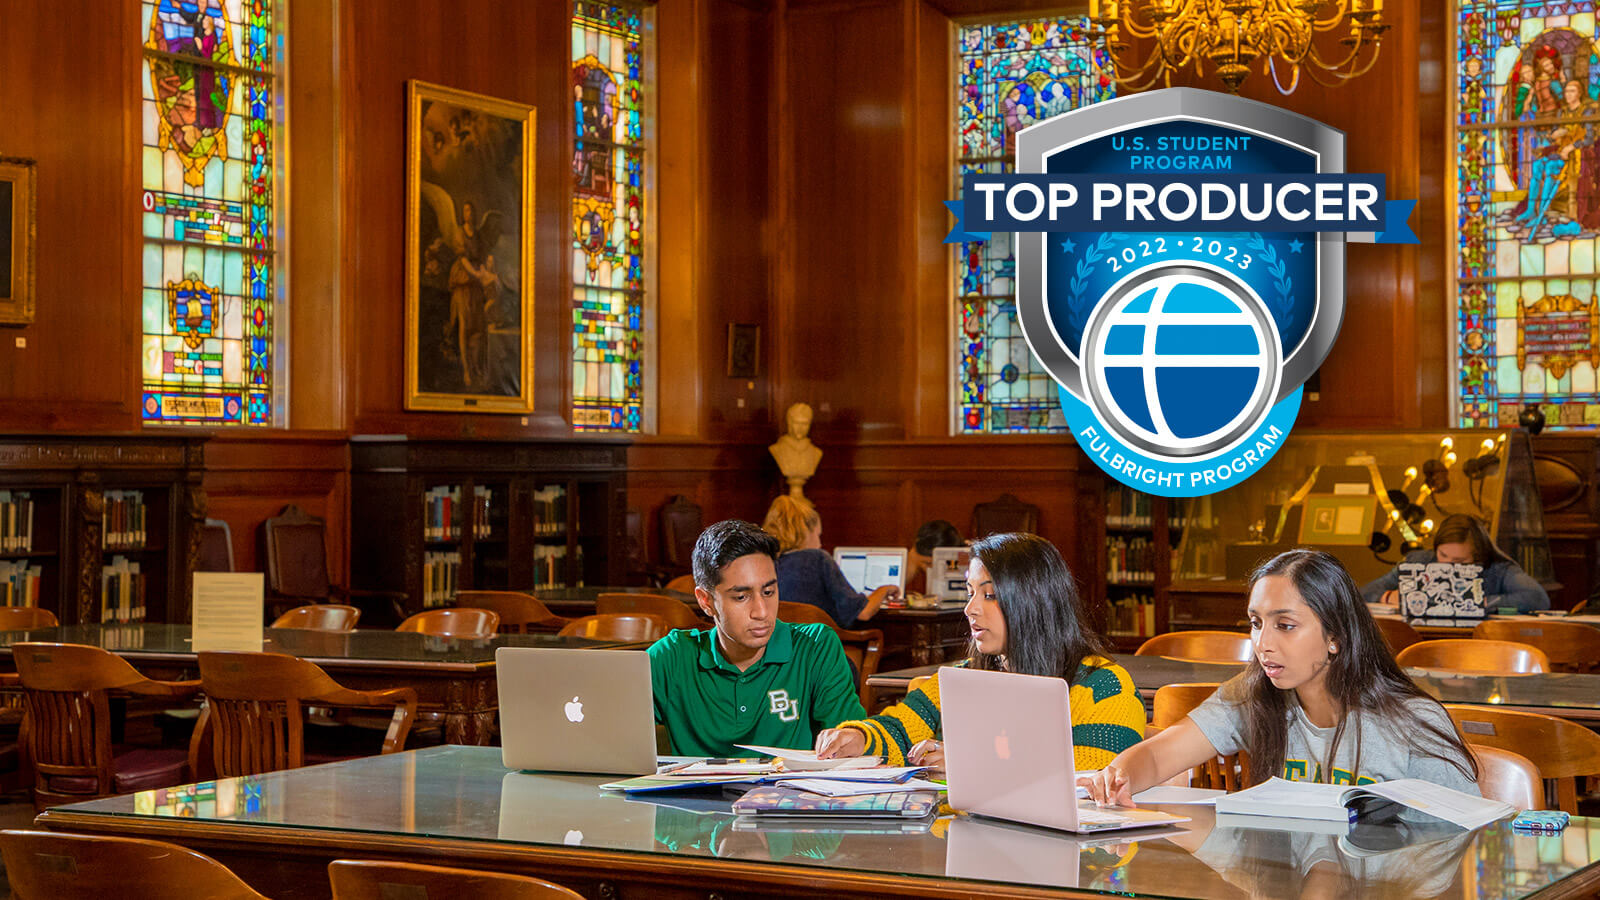 student working at laptops in the Armstrong Browning Library with Fulbright Top Producer badge above them